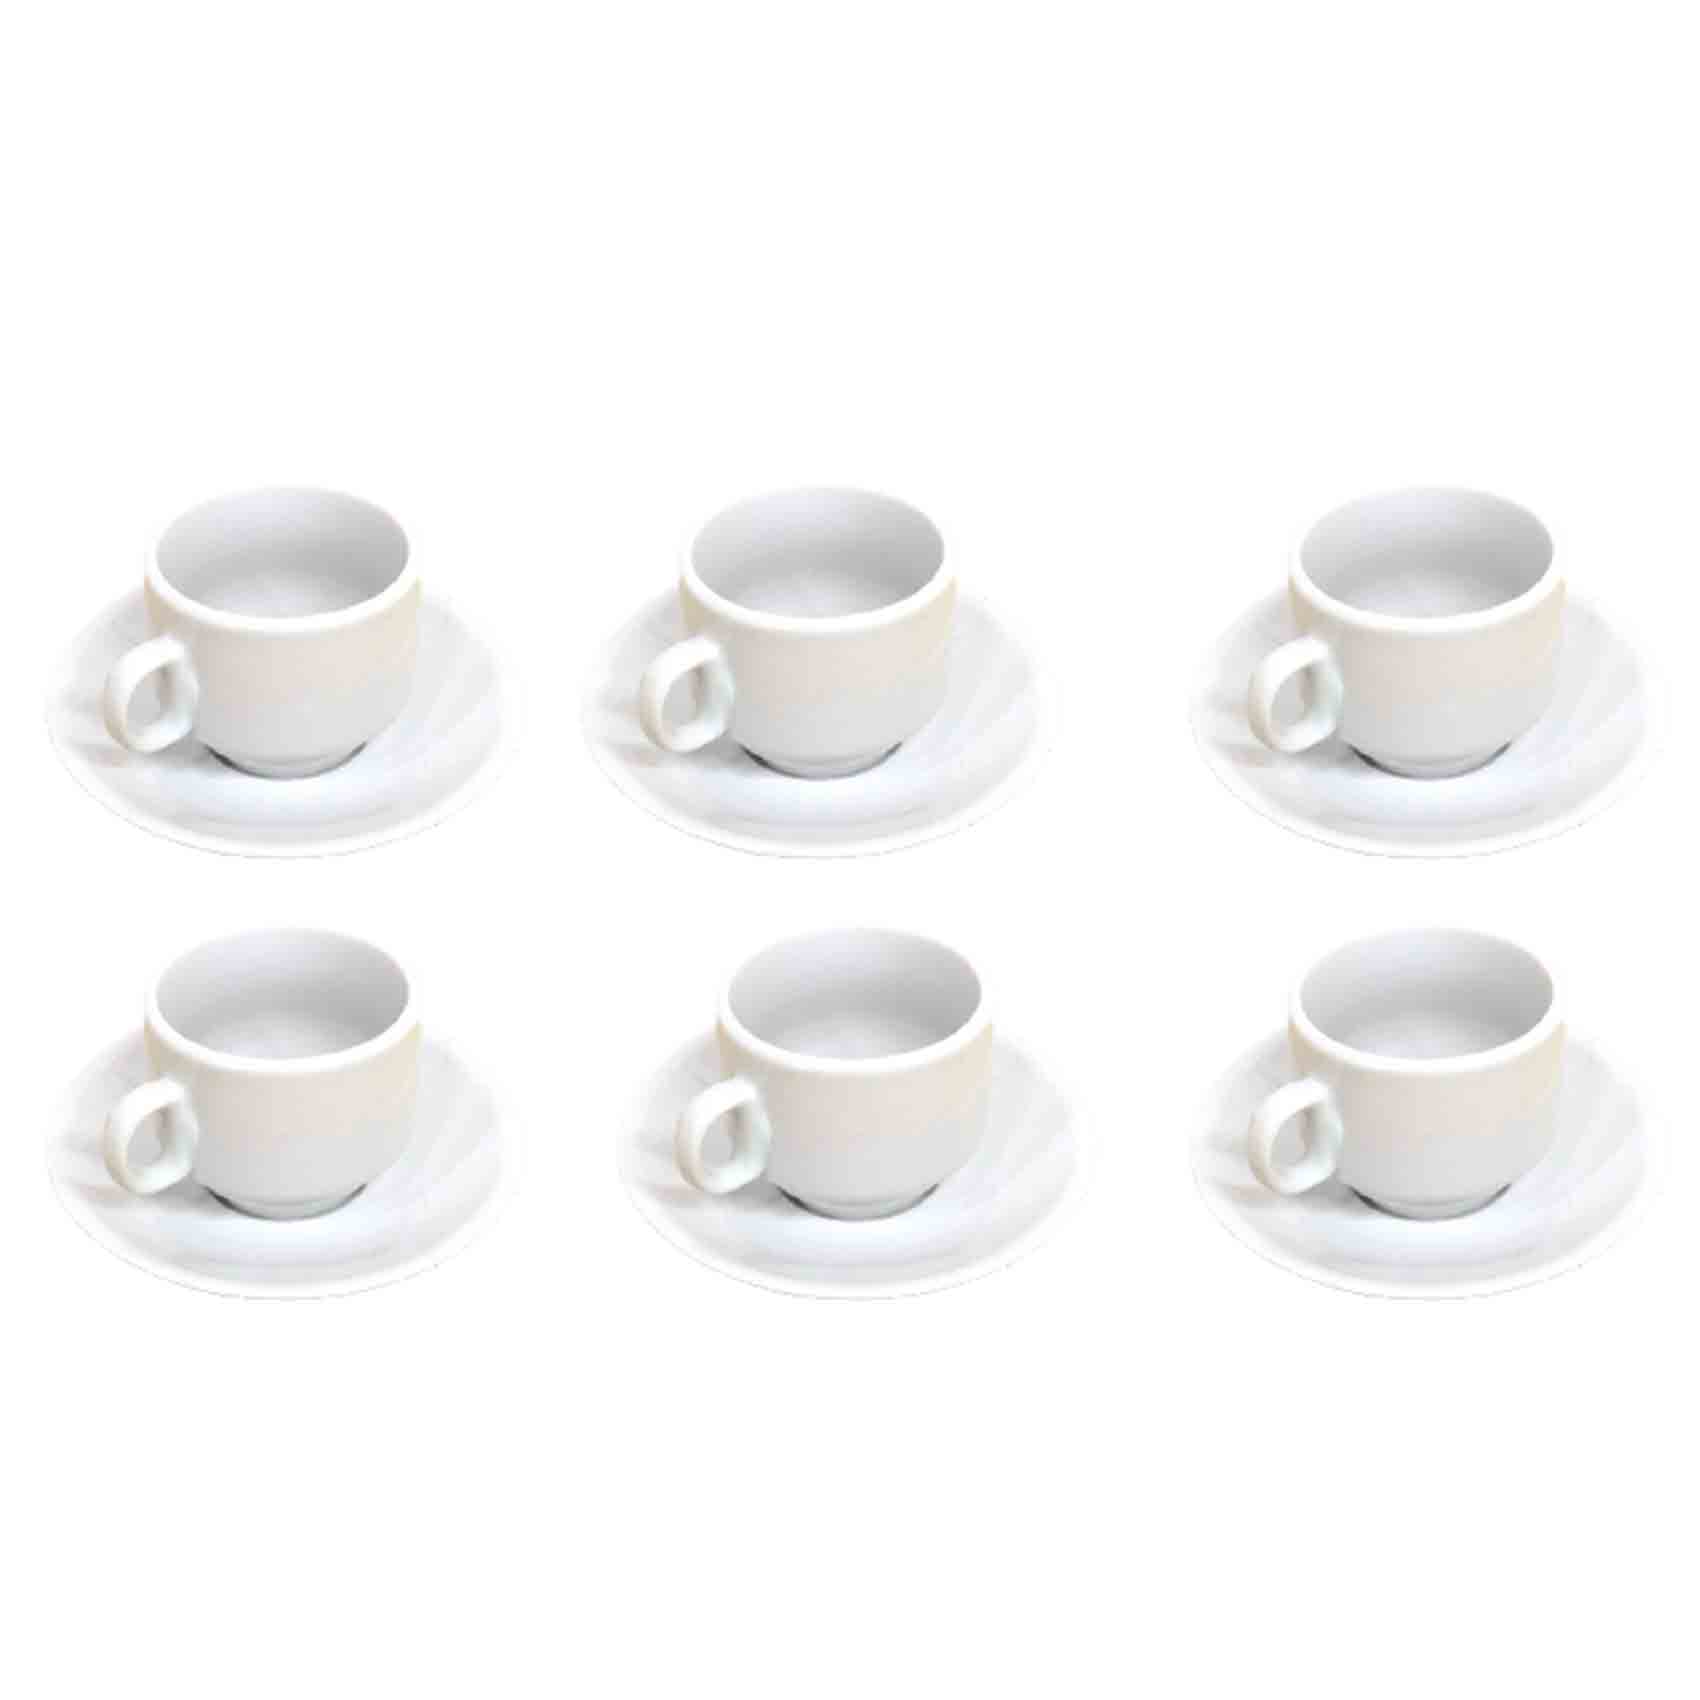 Coffee Cups Set 12 Pieces White